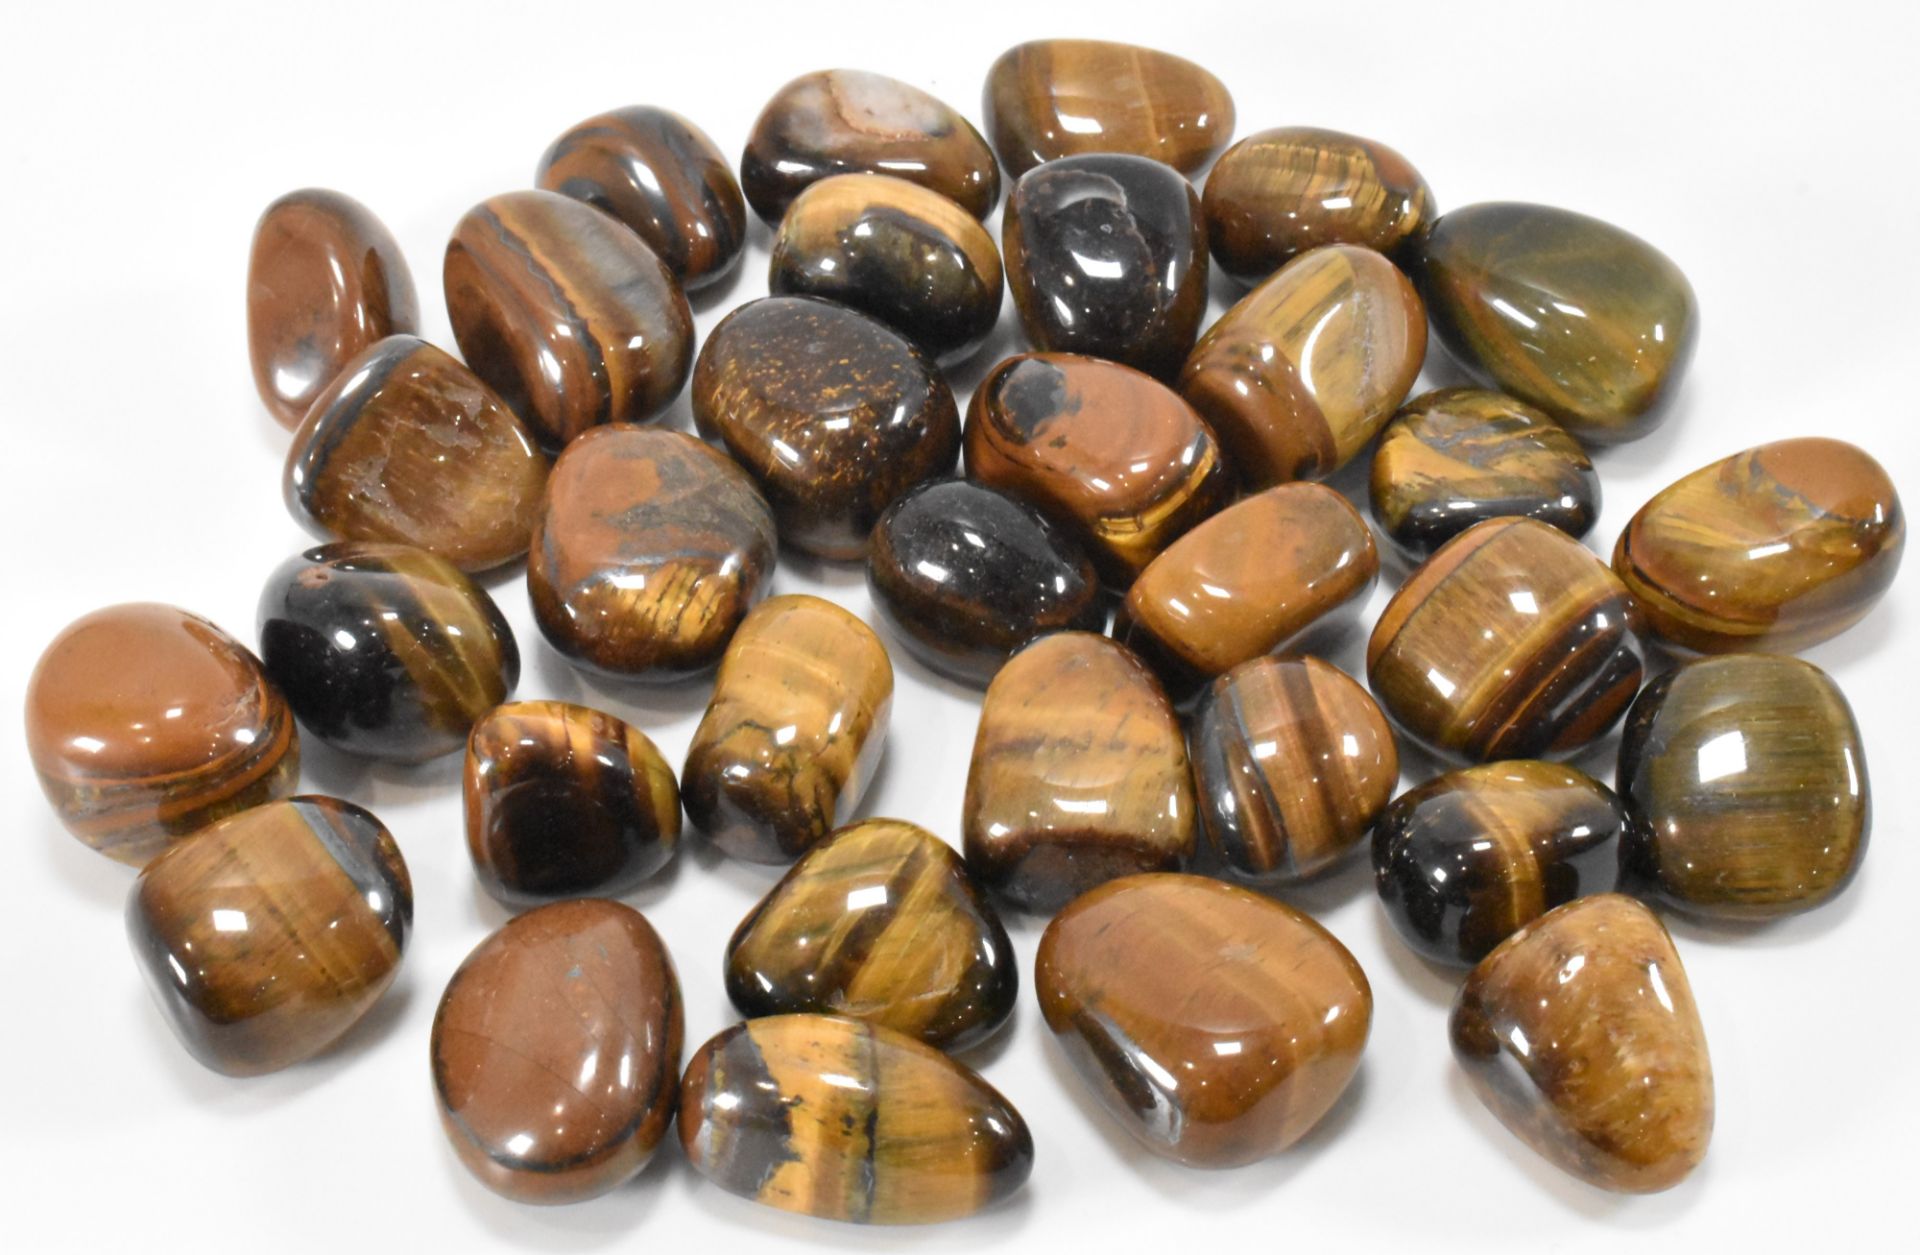 MINERAL SPECIMENS - COLLECTION OF TIGERS EYE